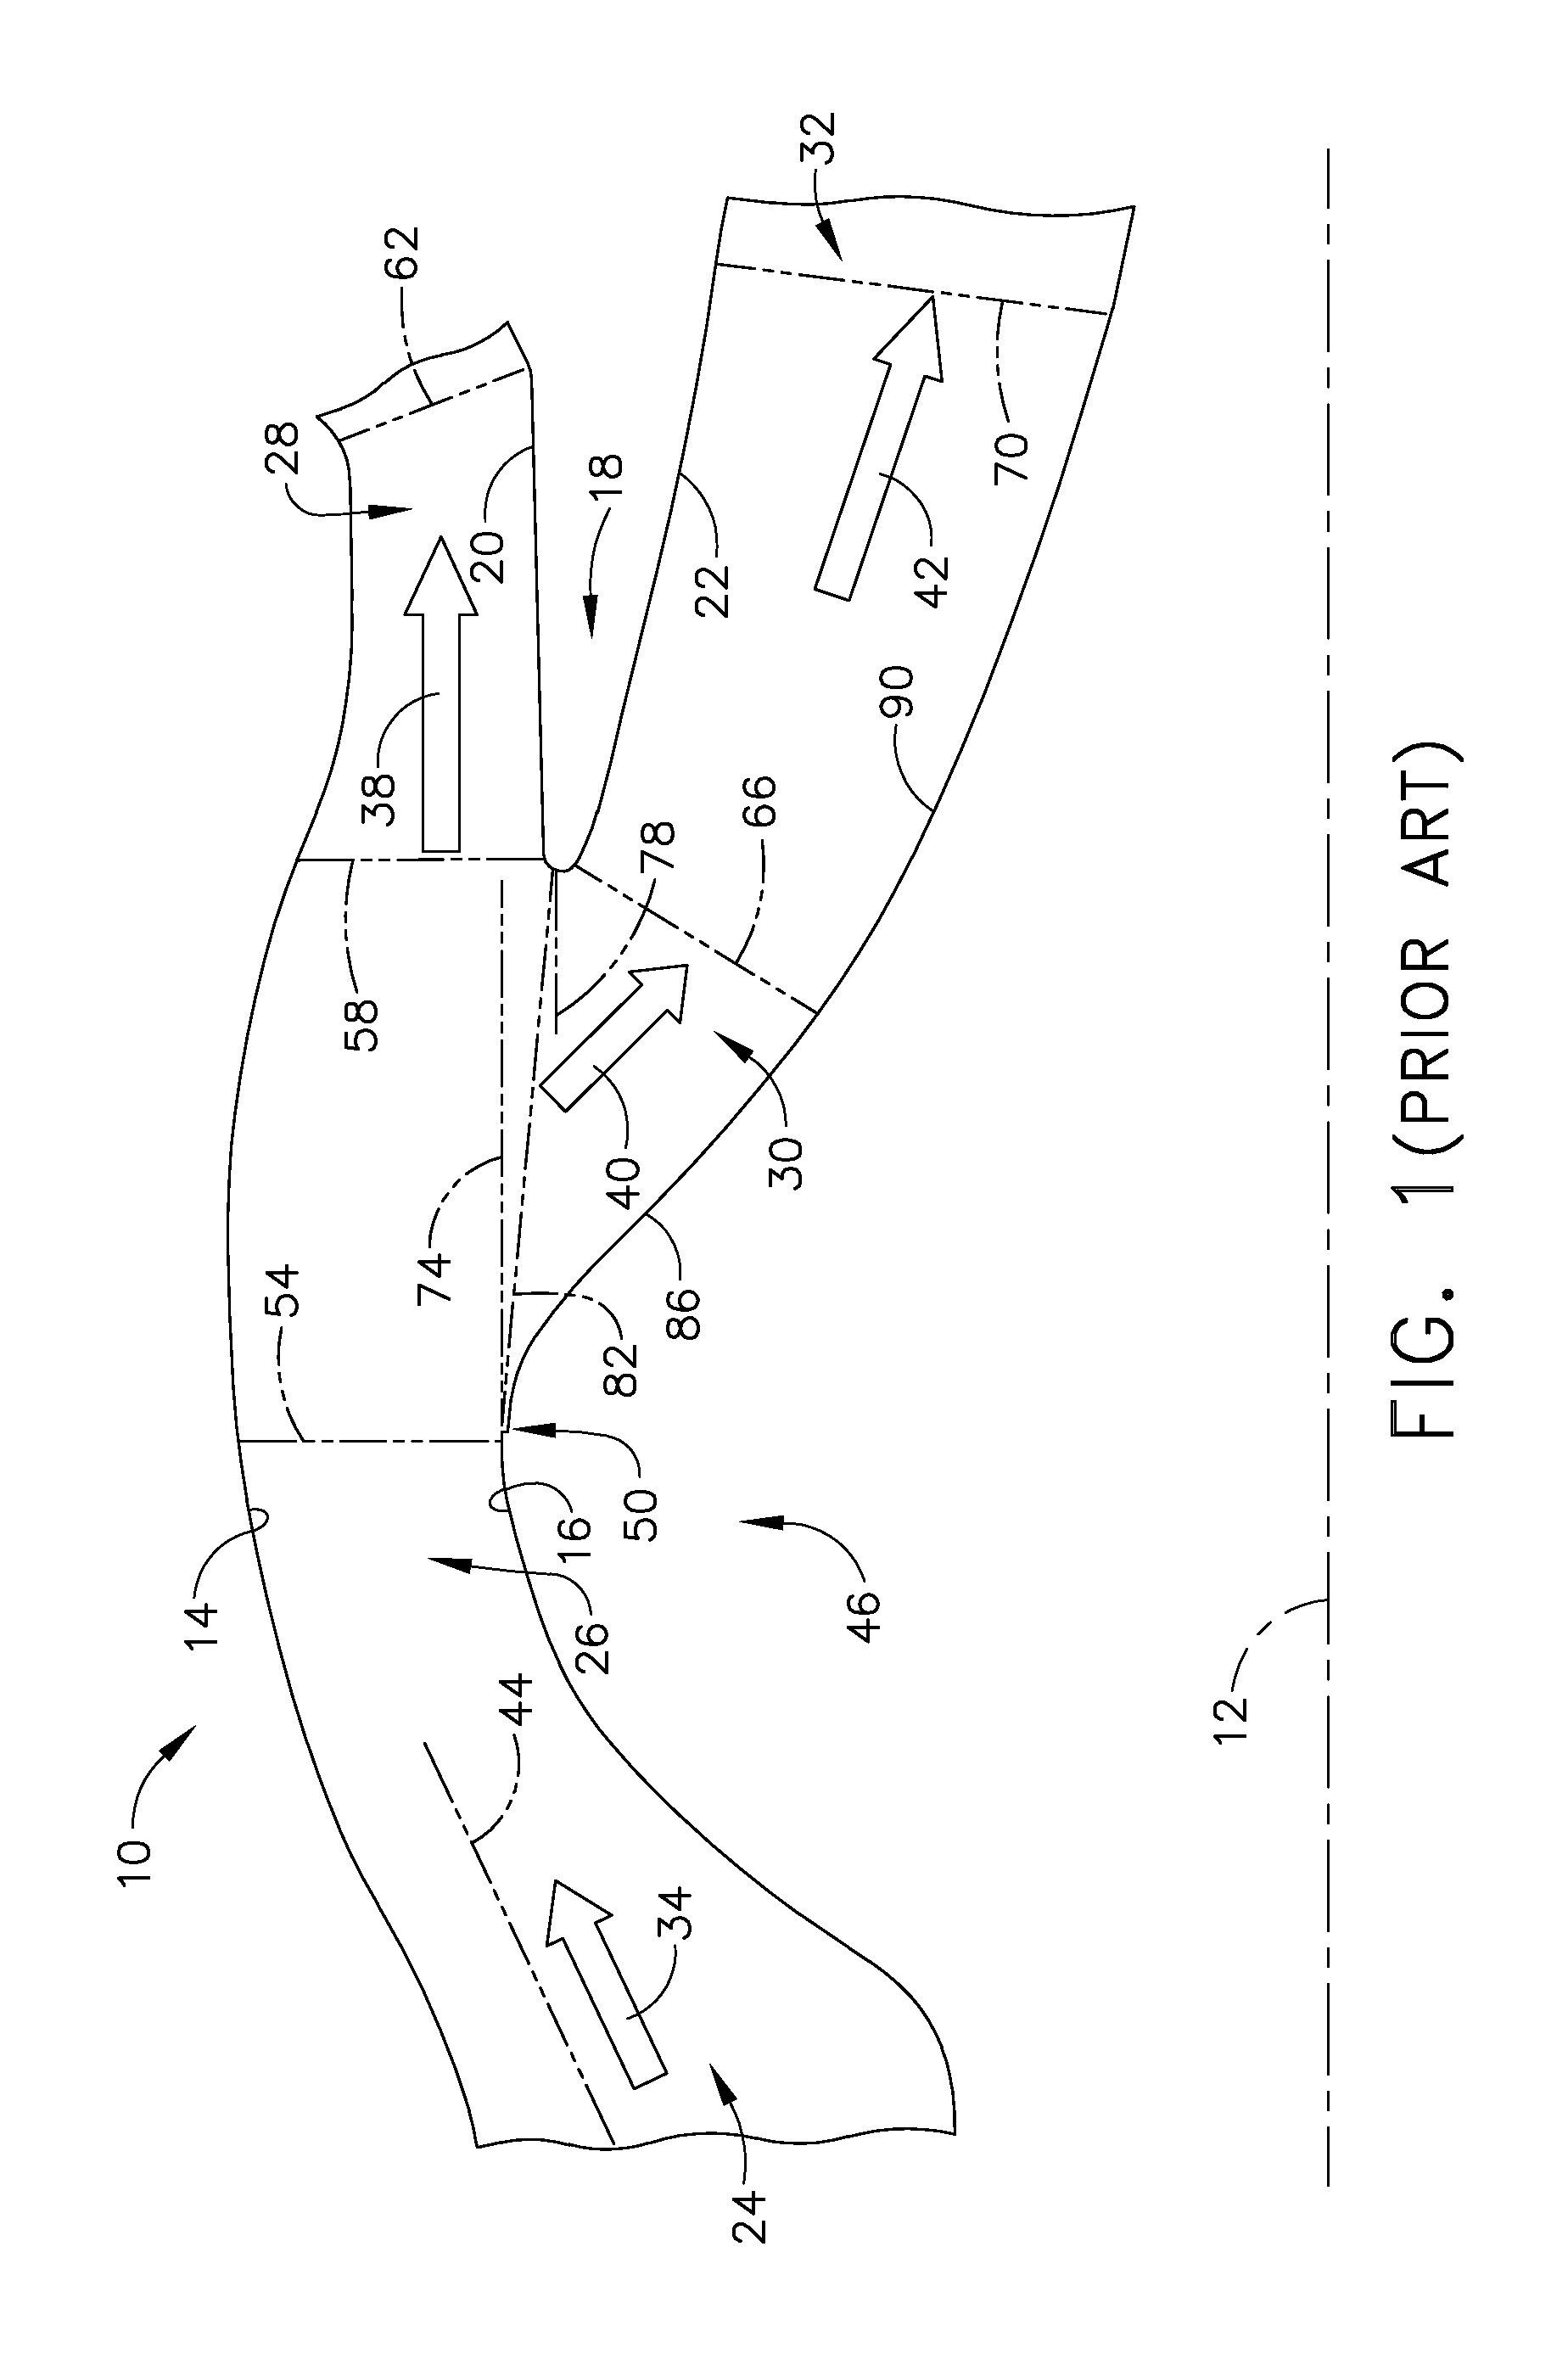 Particle separator using boundary layer control